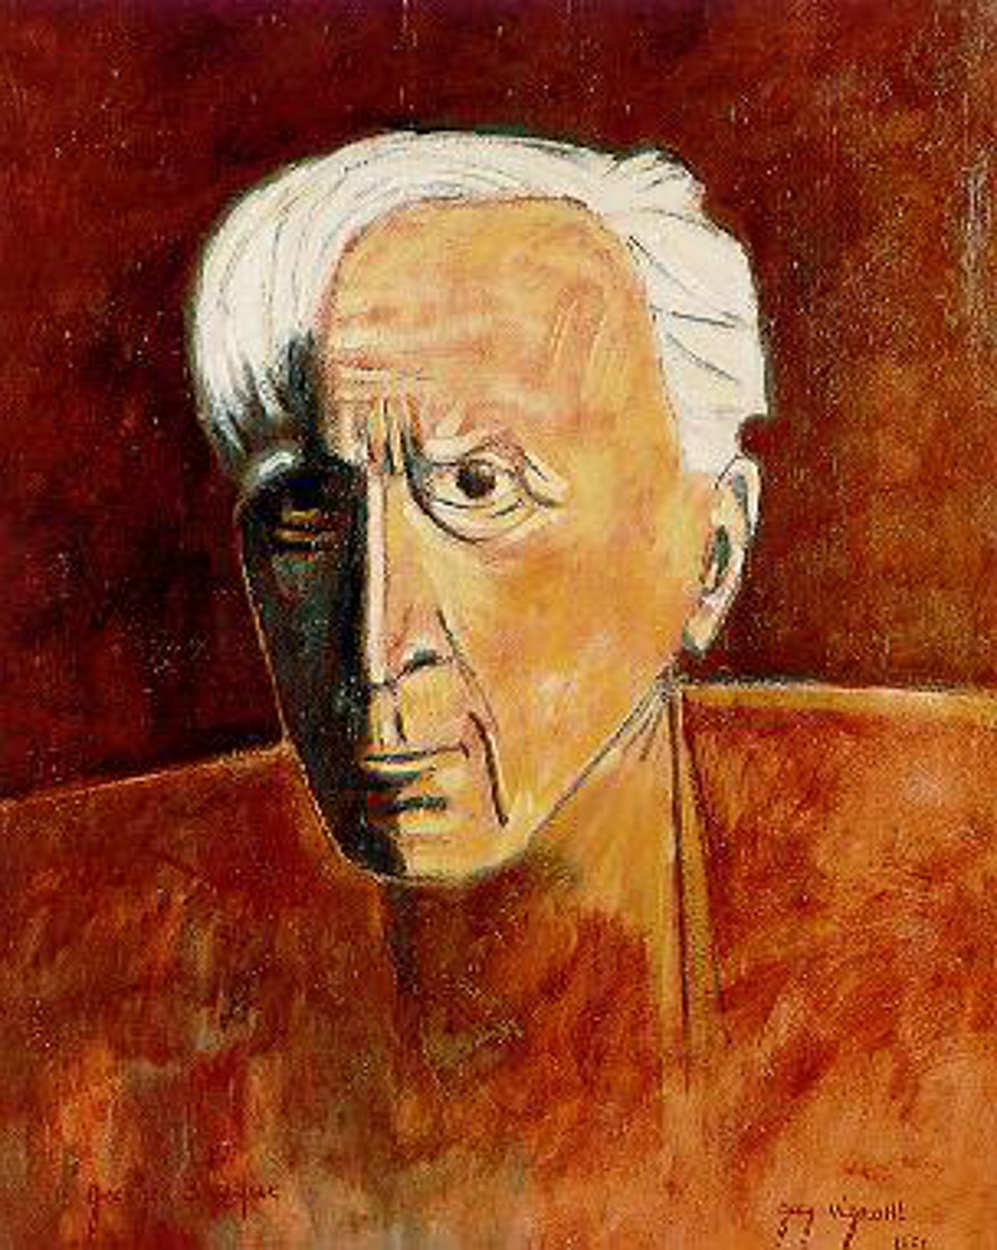 Georges Braque - May 13, 1882 - August 31, 1963